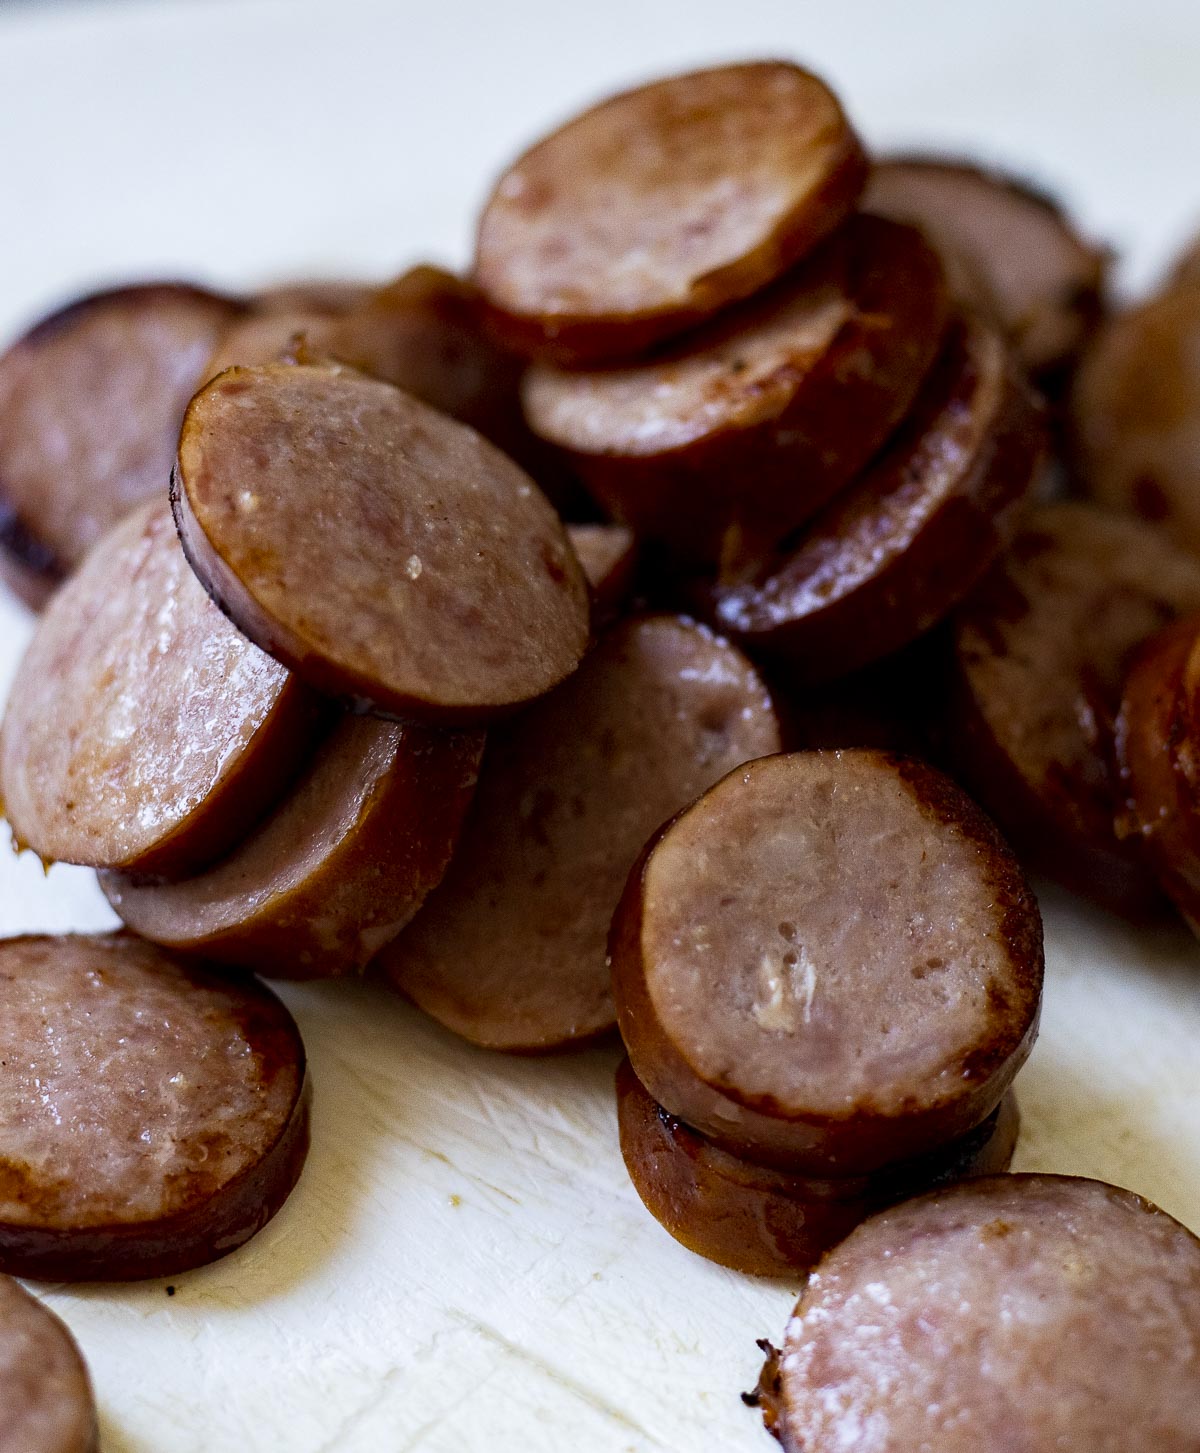 Smoked sausage sliced and browned for the seafood rice.